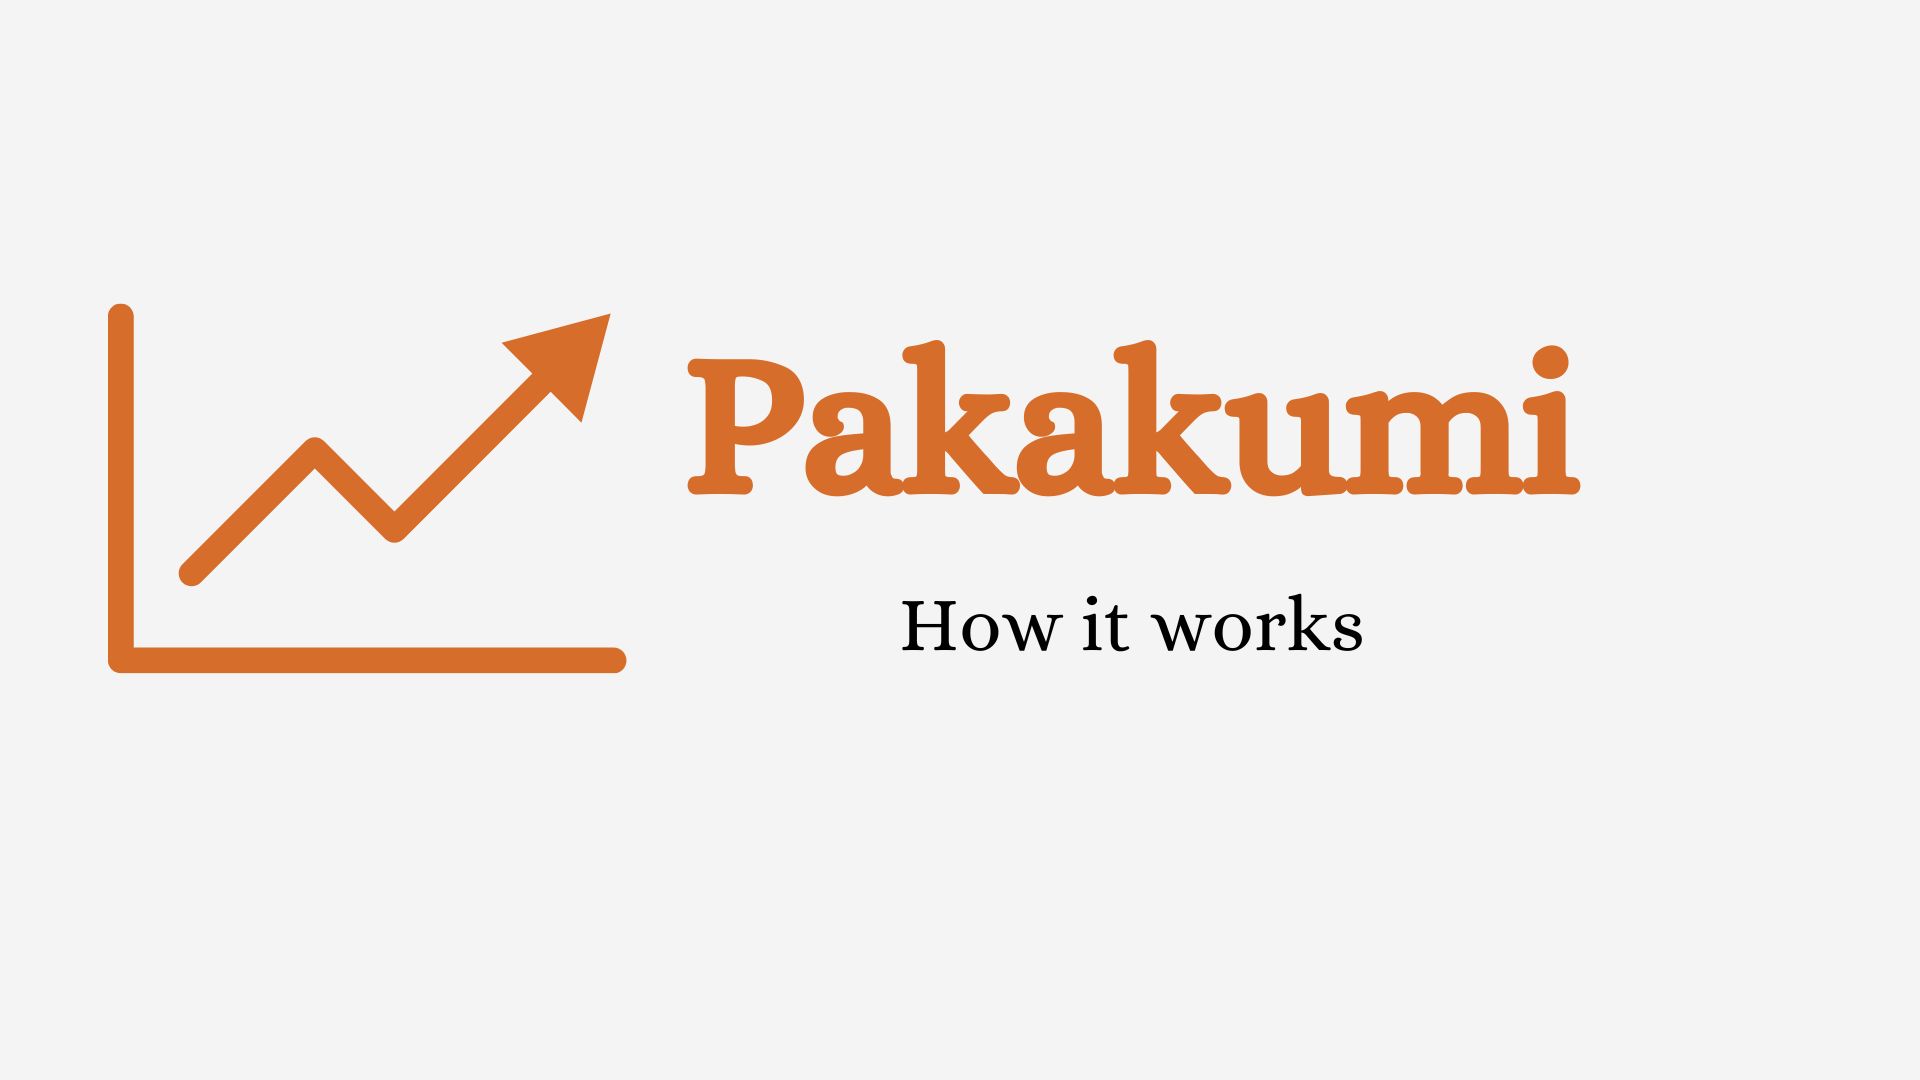 What is Pakakumi and how does it work